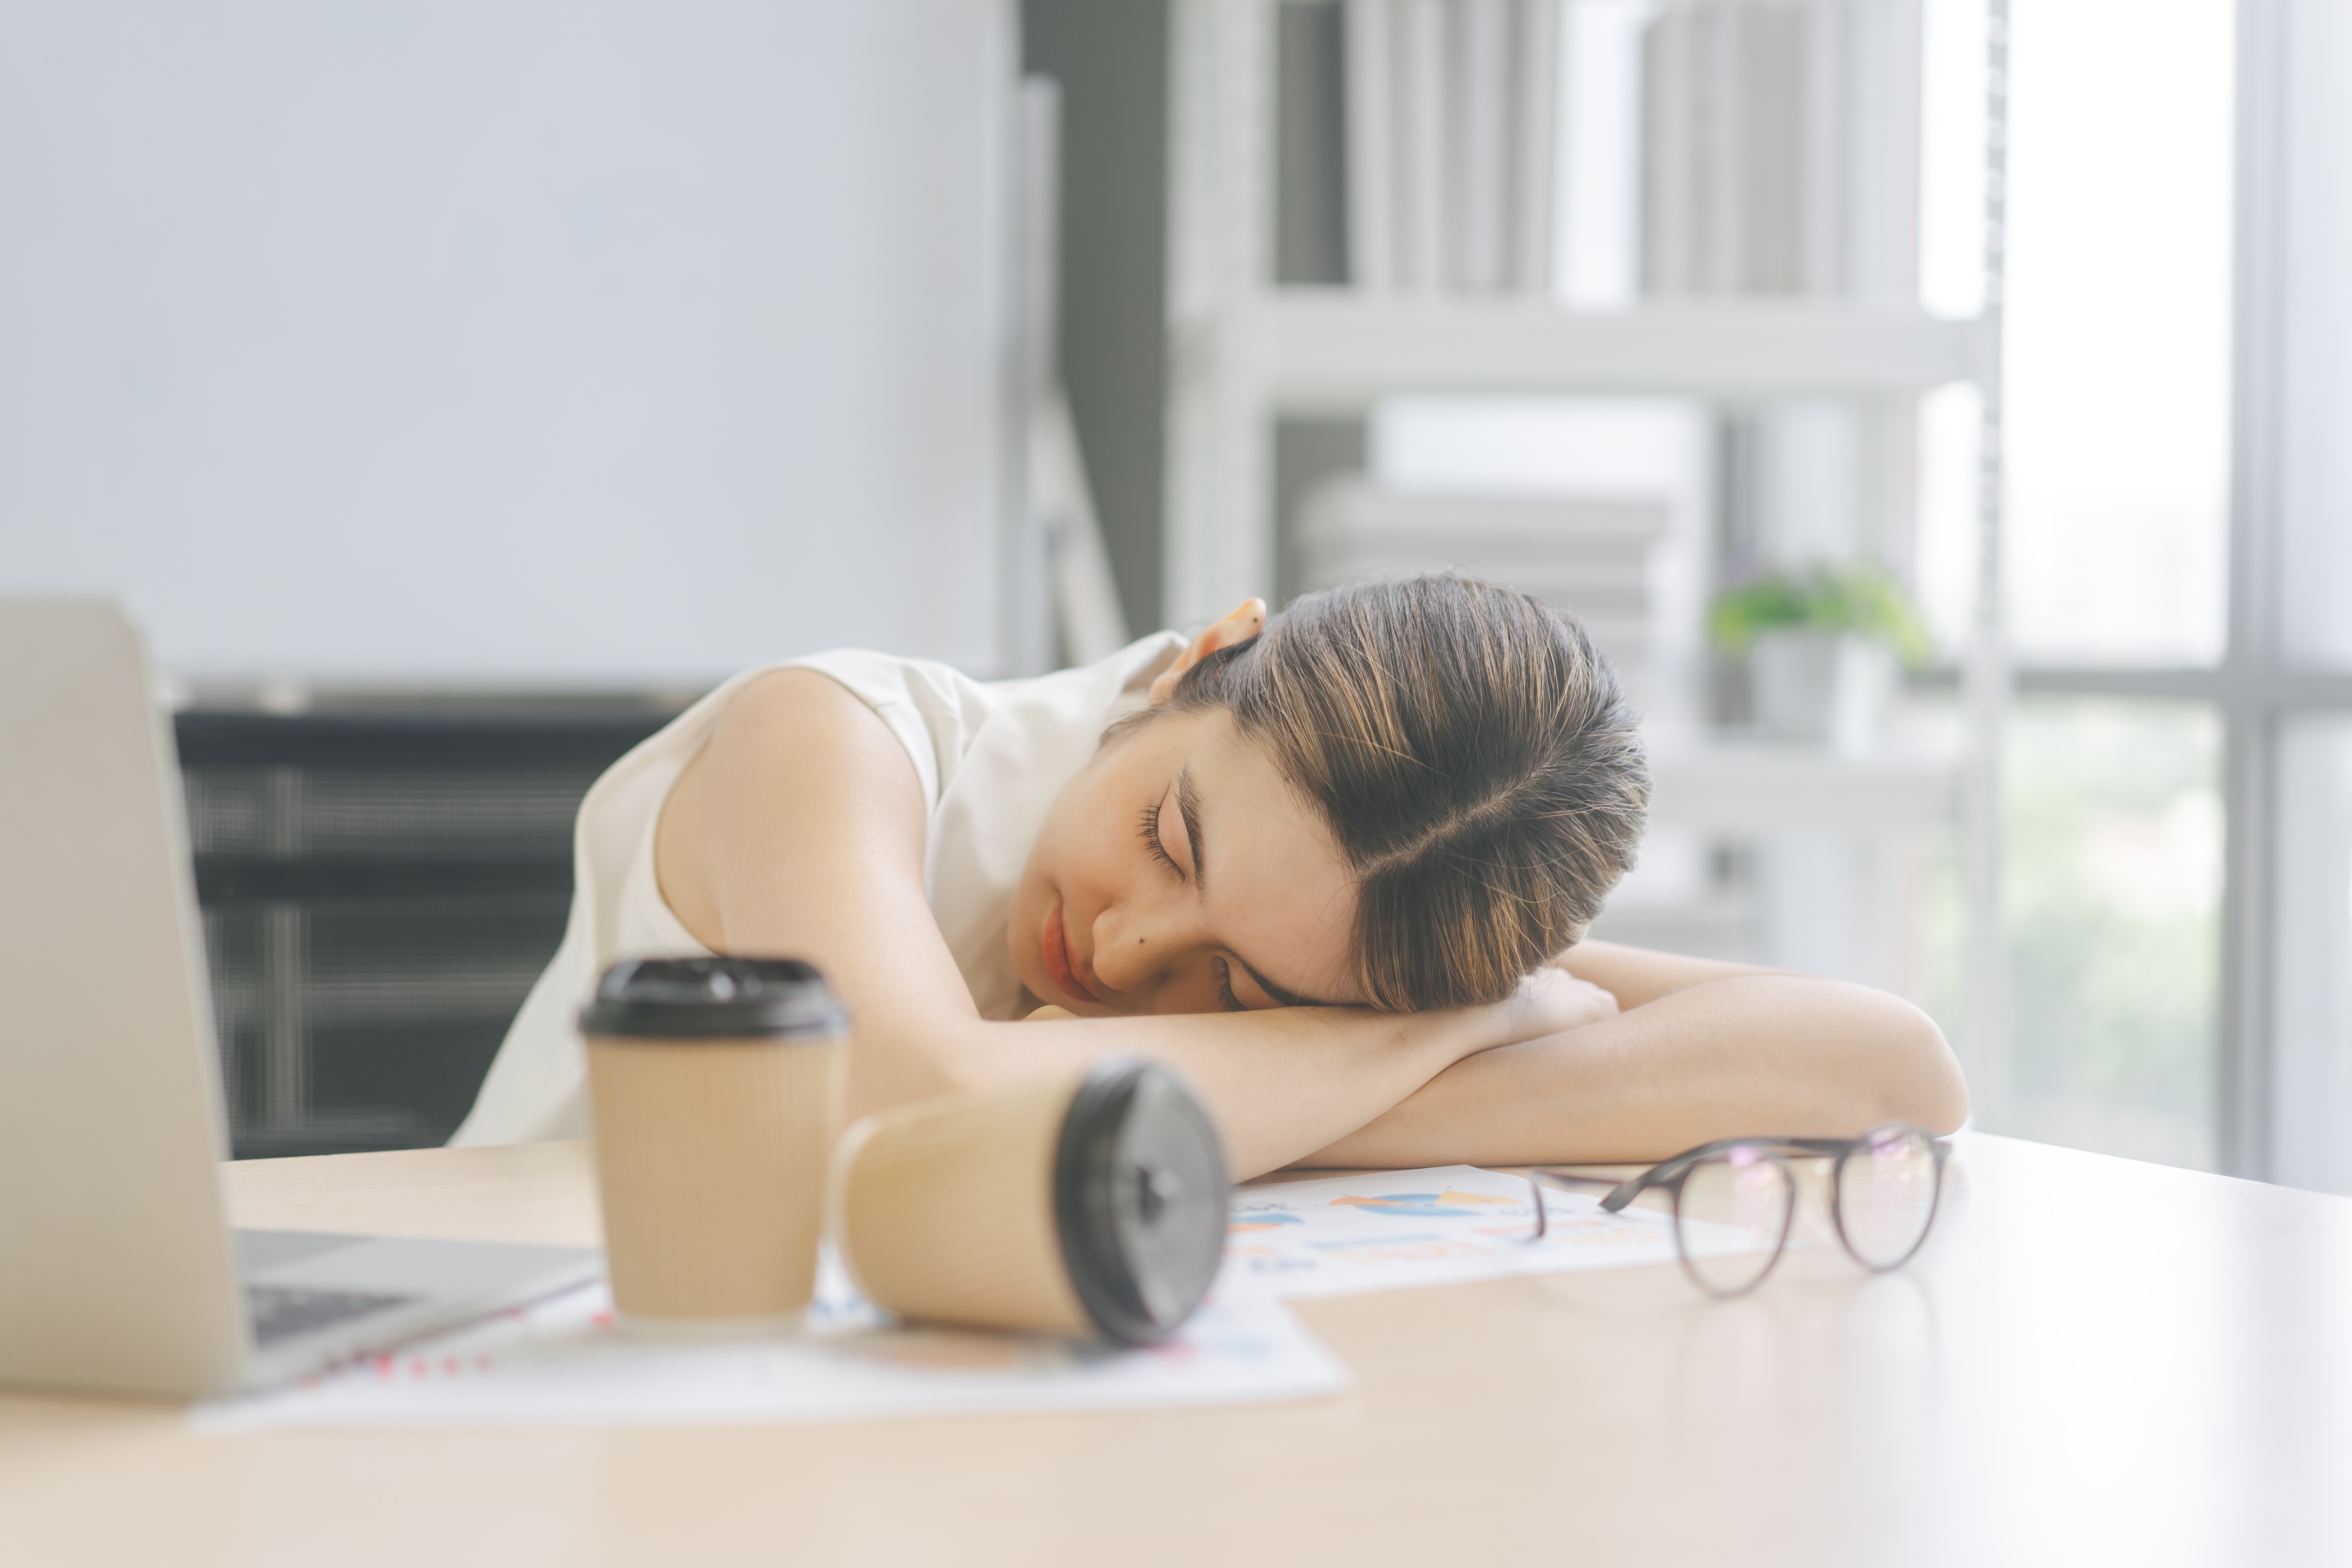 A tired young woman sleeps on the table with cups of coffee  | Source: Shutterstock